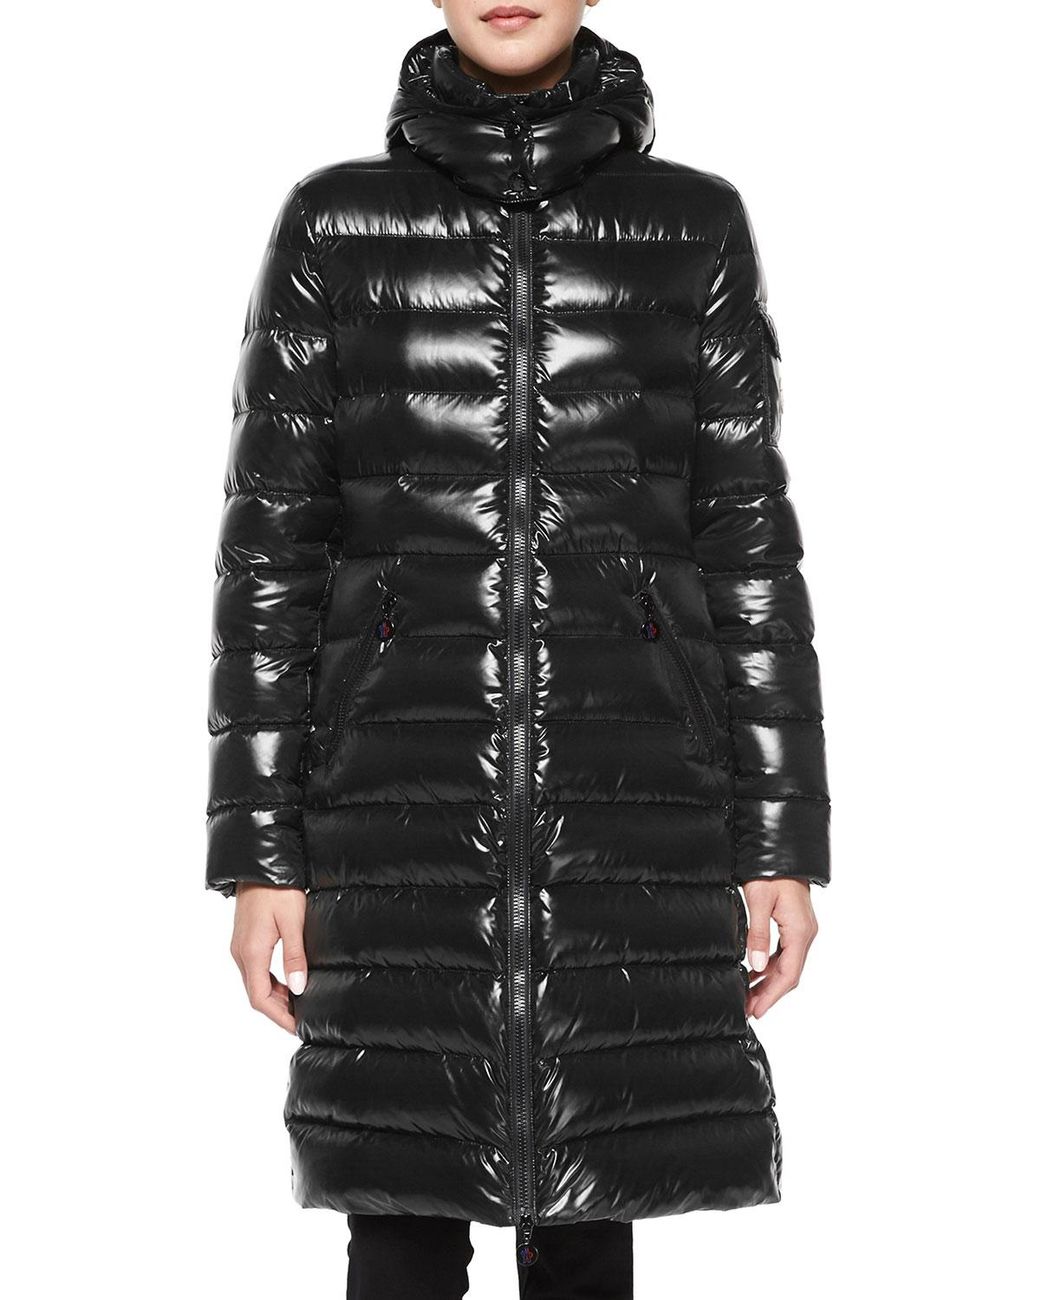 Lyst - Moncler Moka Shiny Fitted Puffer Coat With Hood in Black